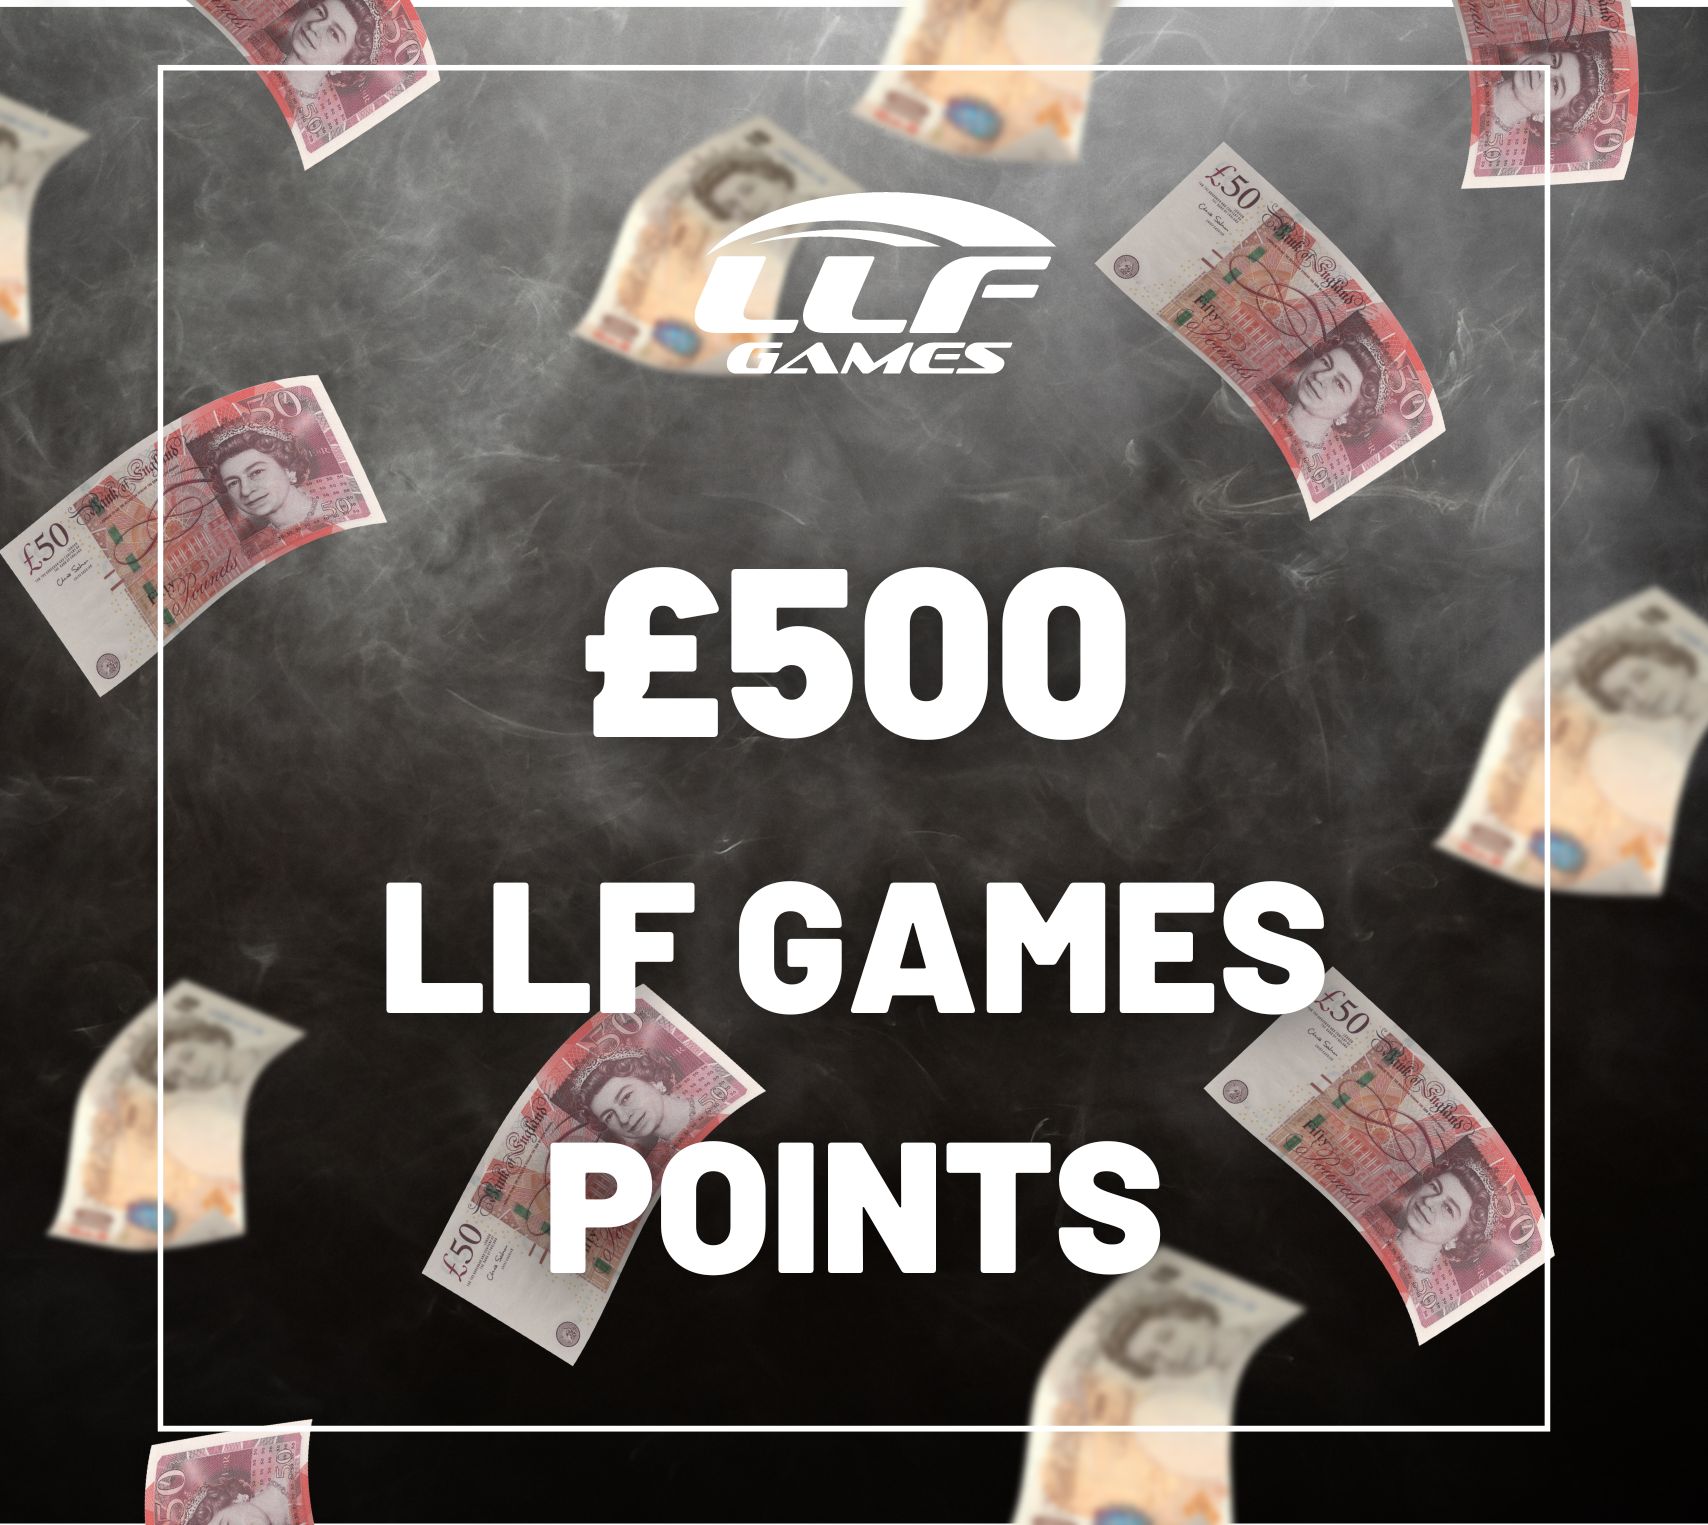 £500 LLF Points (Site Credit)